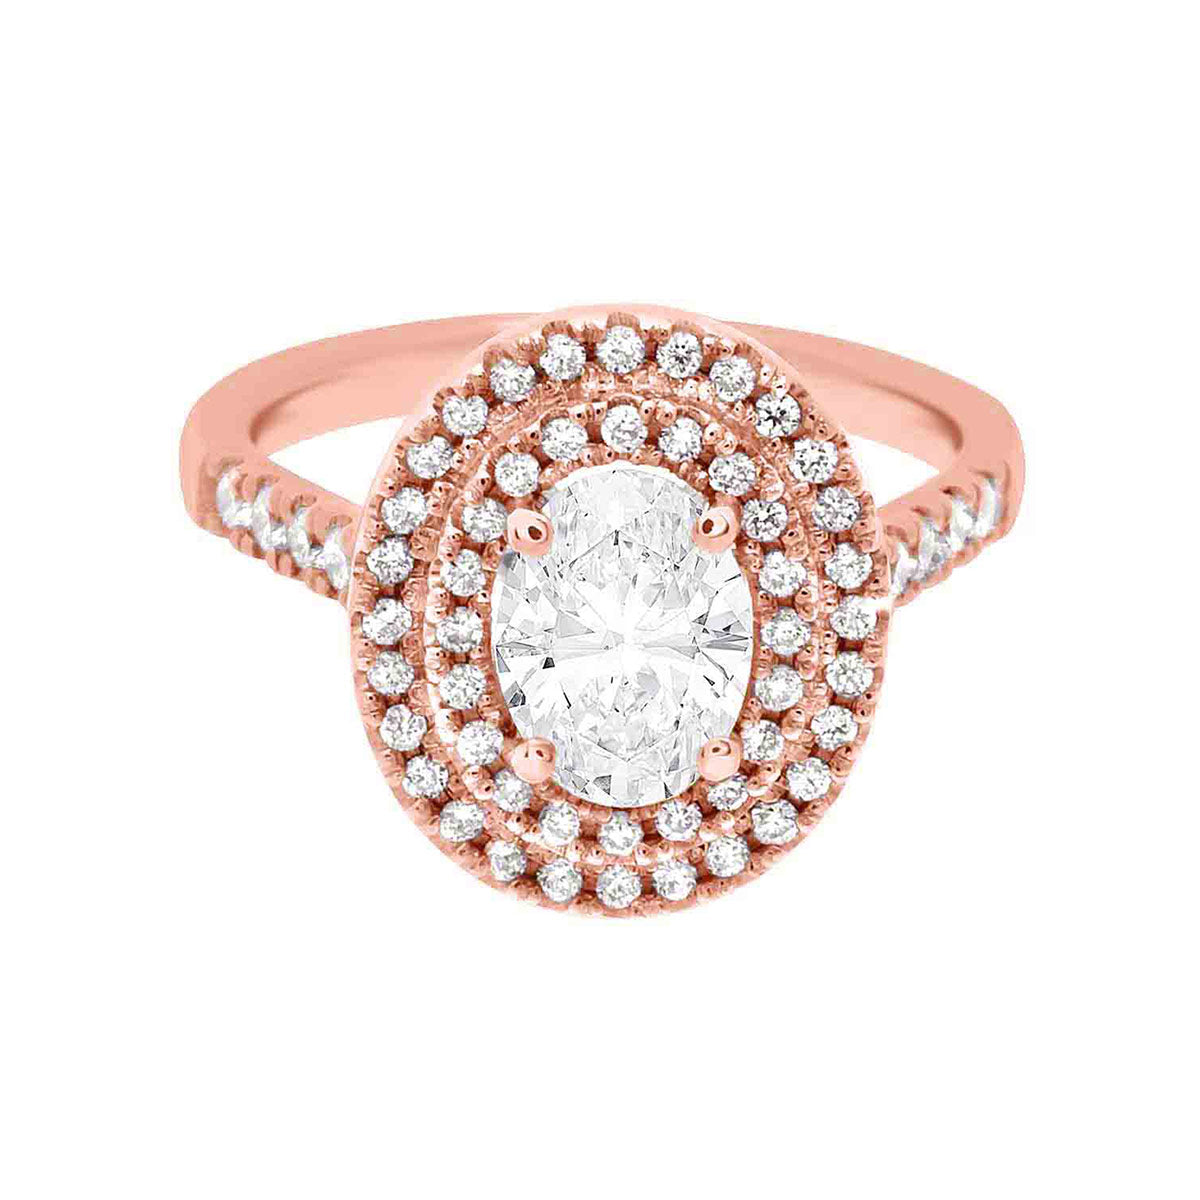 Double Halo Oval Engagement Ring In rose gold